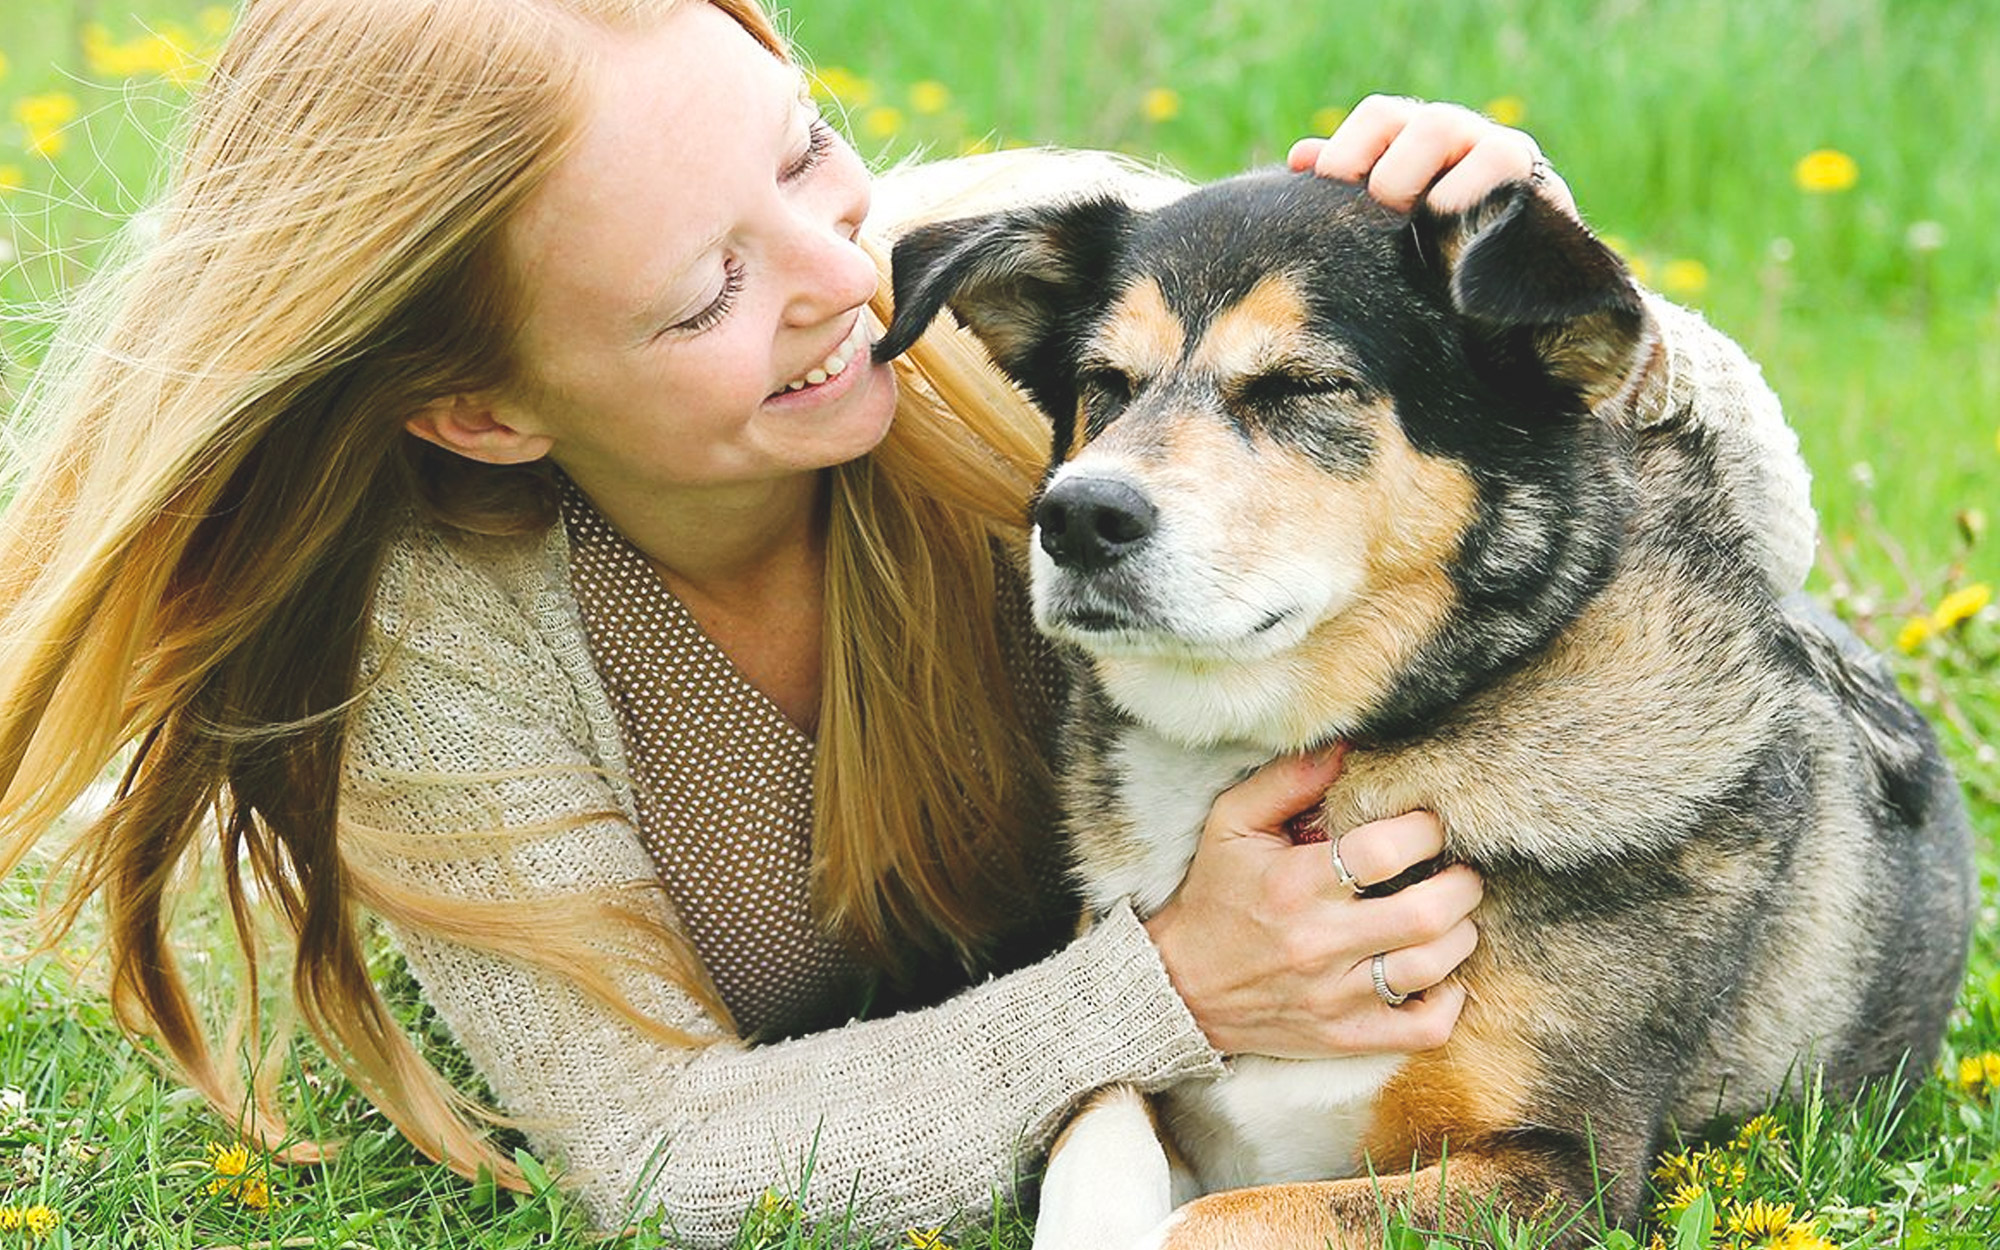 Wisest Ways to Help Your Dog Live Longer